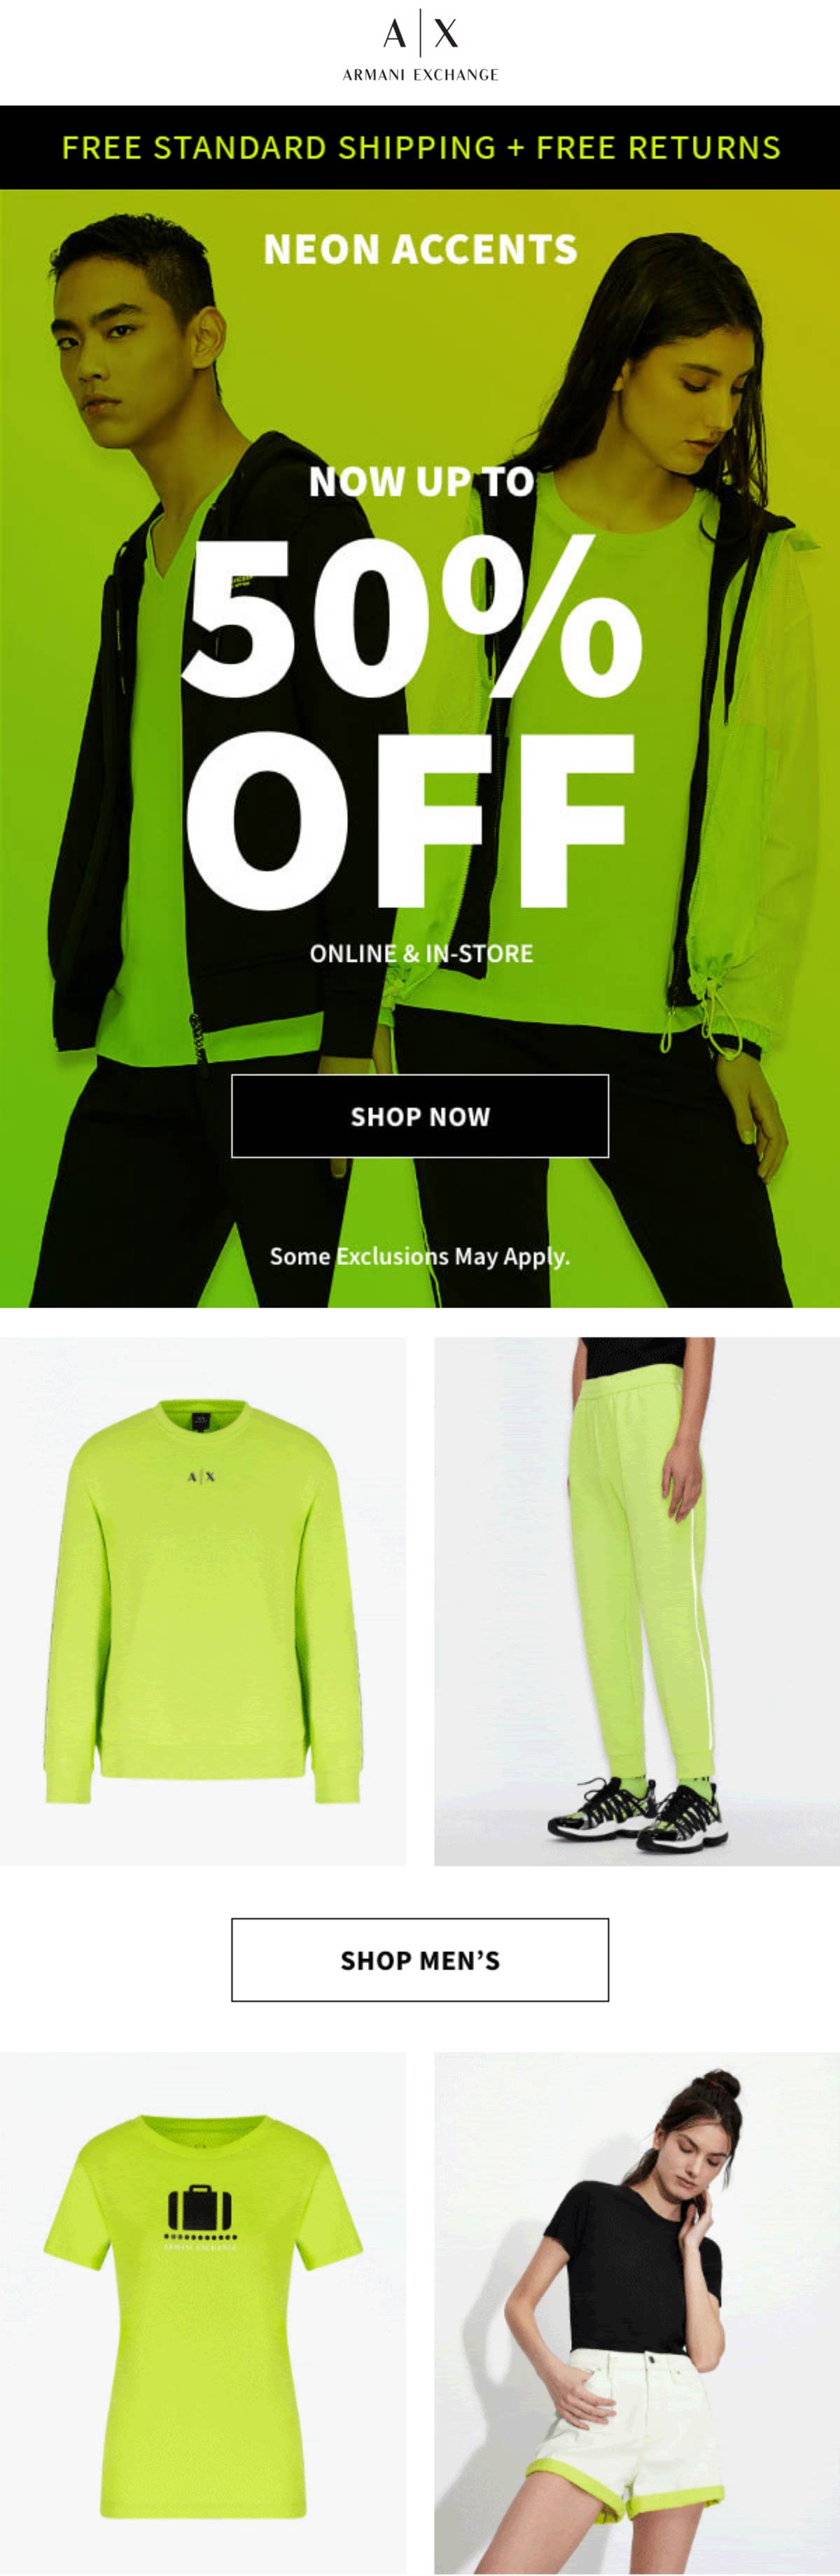 Armani Exchange stores Coupon  50% off neon accents at Armani Exchange, ditto online #armaniexchange 